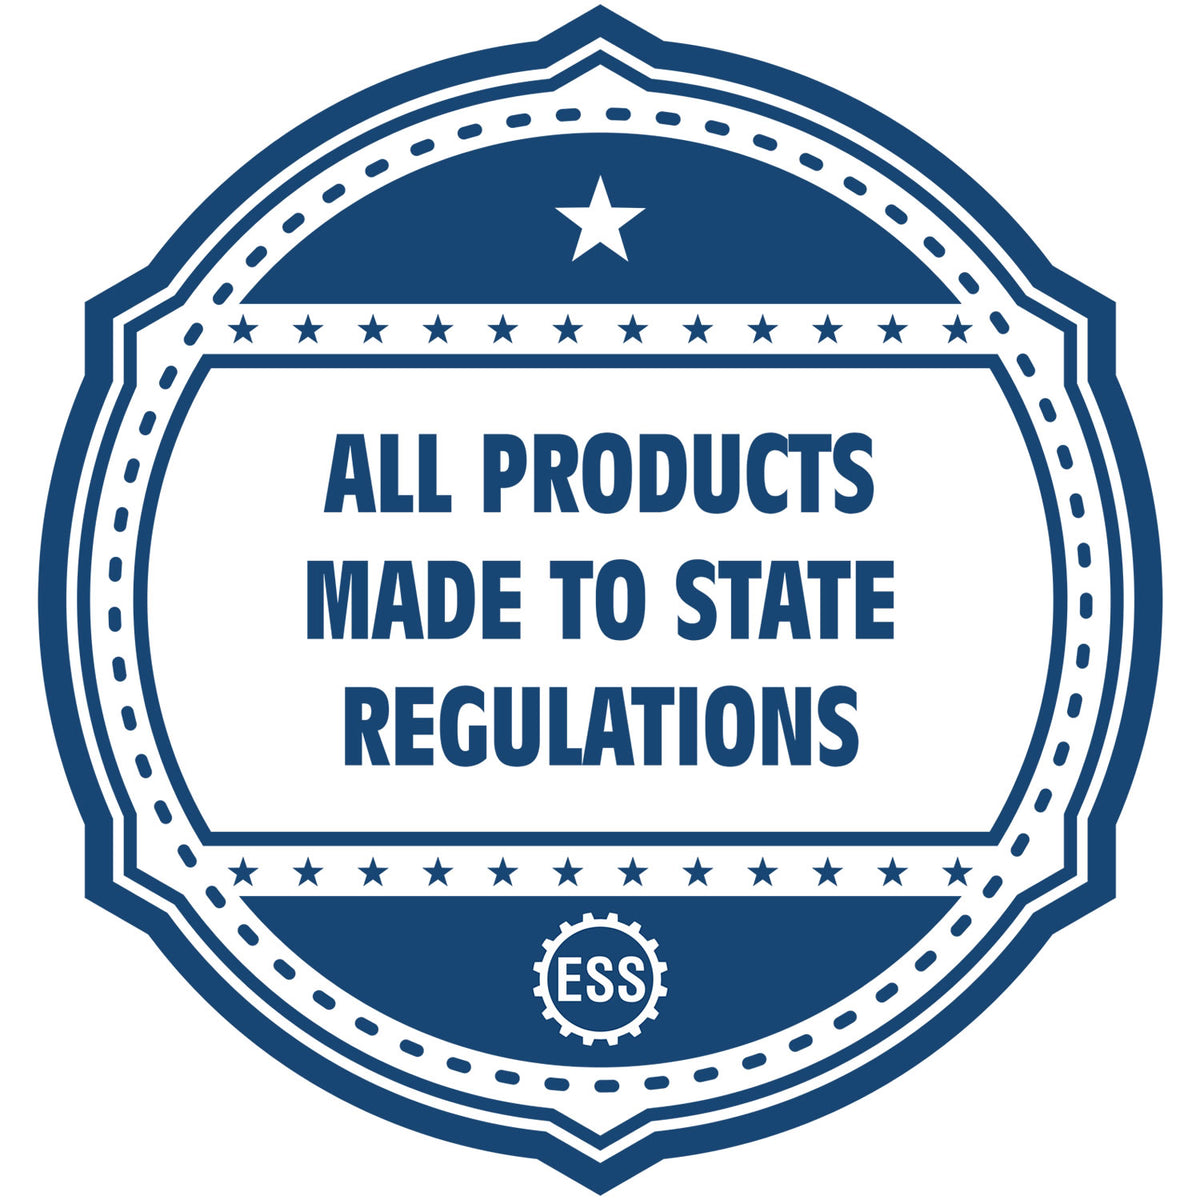 An icon or badge element for the State of Louisiana Soft Land Surveyor Embossing Seal showing that this product is made in compliance with state regulations.